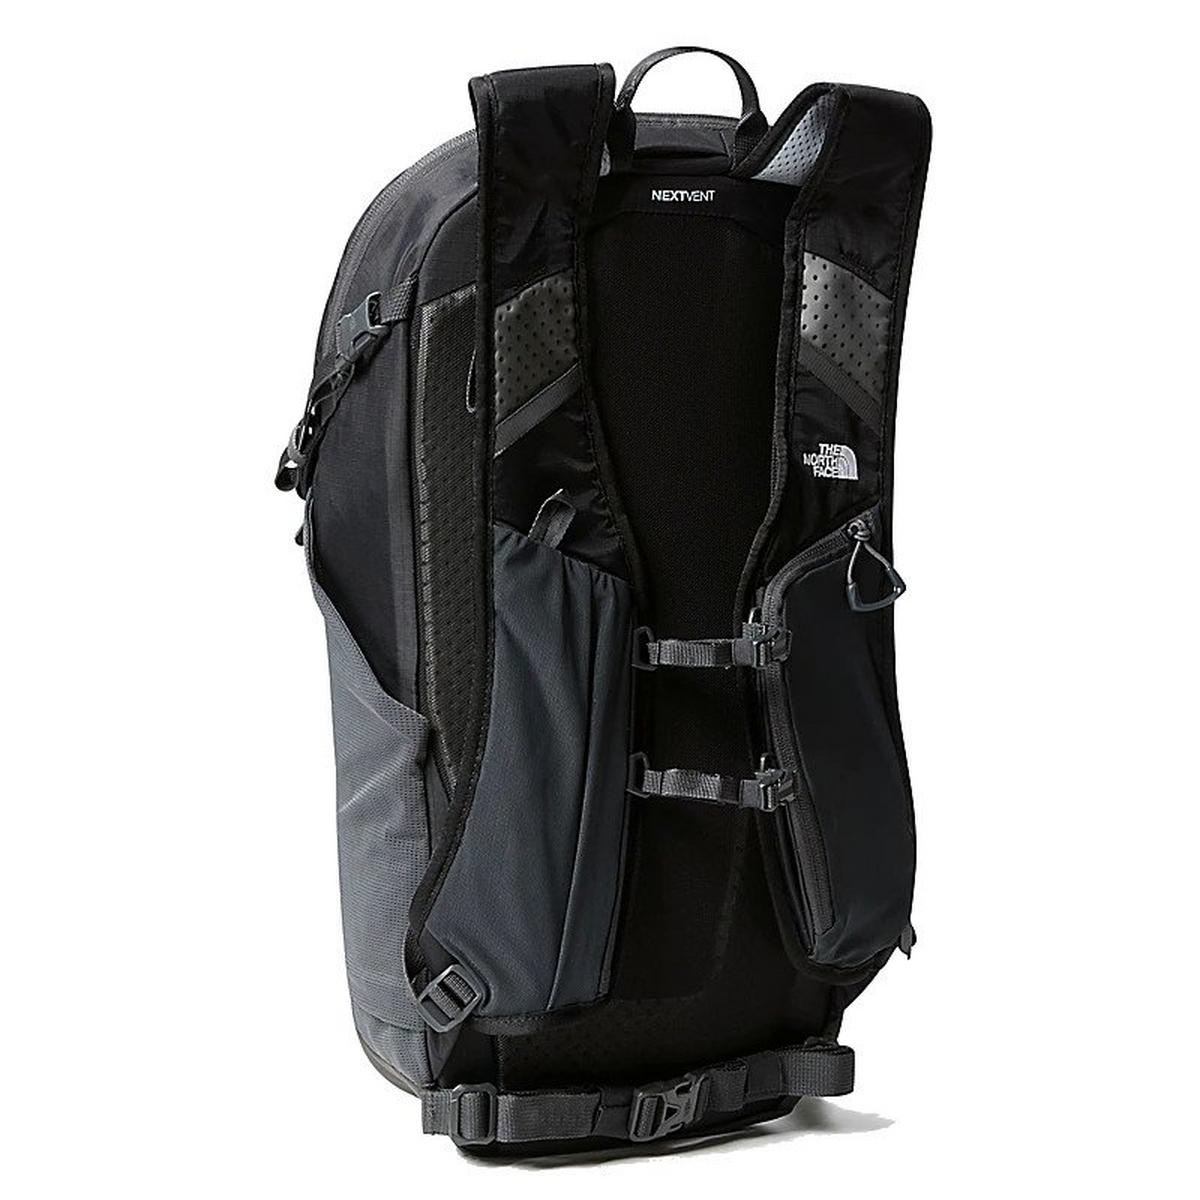 The North Face Trail Lite Speed 20L Backpack - Grey